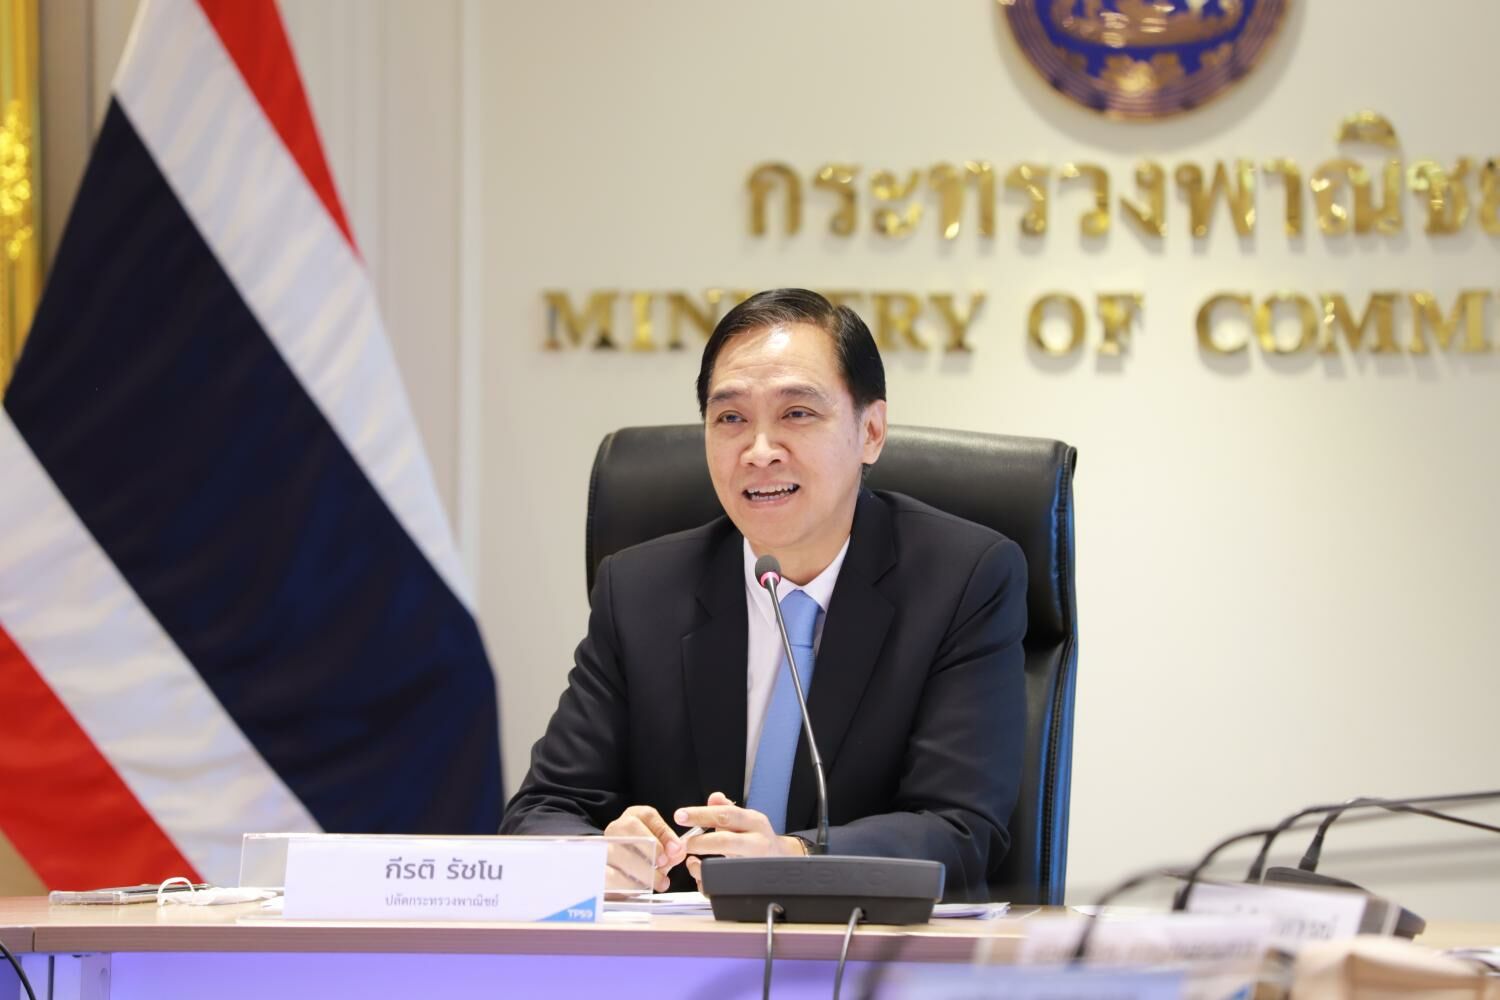 Thailand braces for Houthi attacks impact: export activities remain unaffected